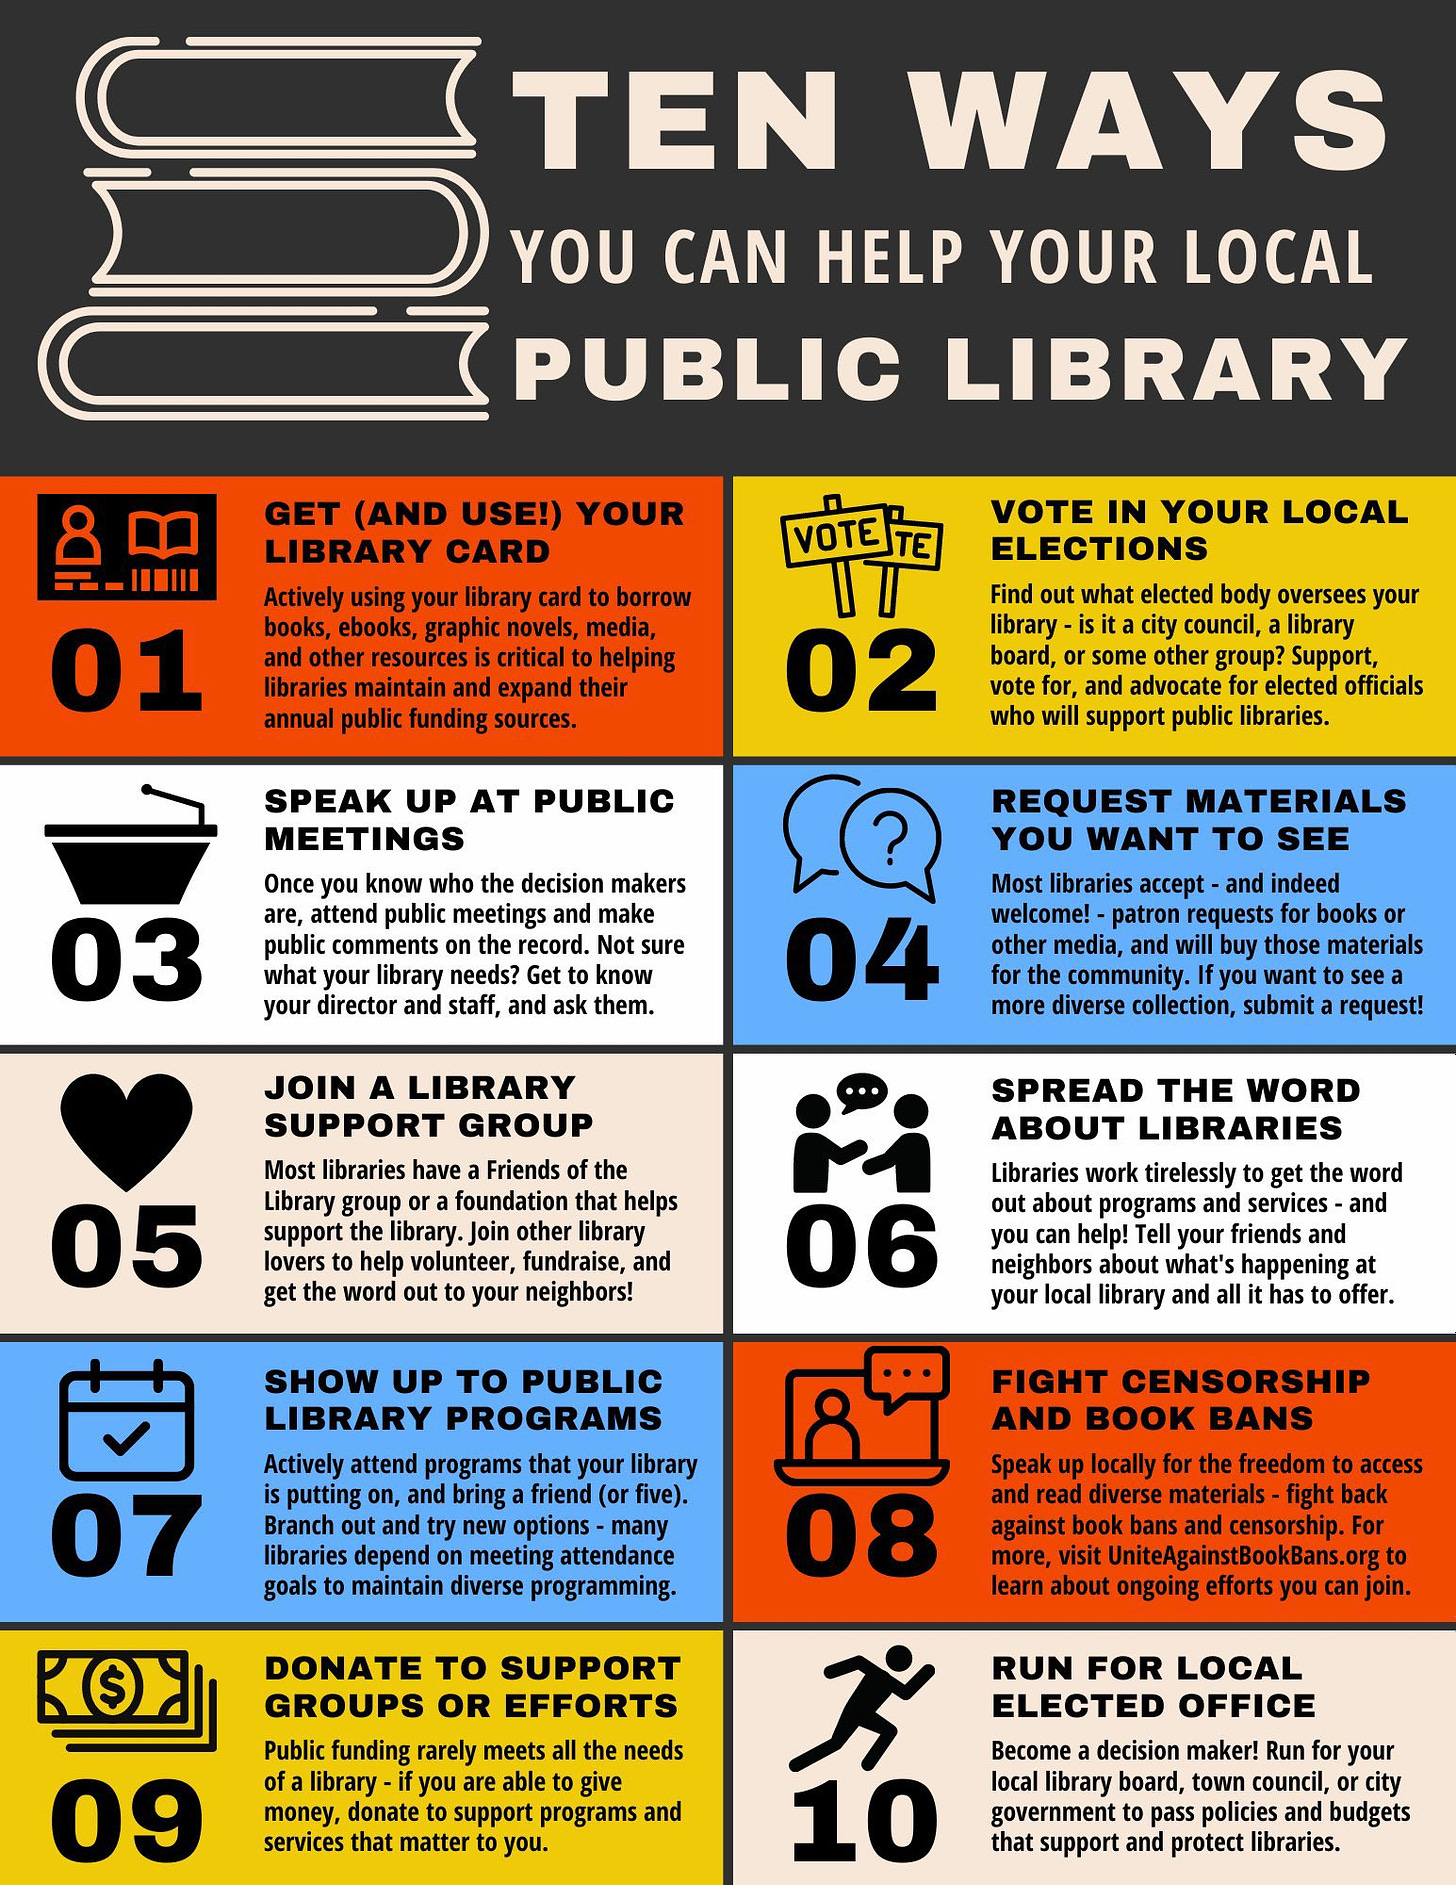 Ten ways you can help your local public library. 1: get and use your library card. 2: vote in your local elections. 3: speak up at public meetings. 4: request materials you want to see. 5: join a library support group. 6: spread the word about libraries. 7: show up to library programs. 8: fight censorship and book bans. 9: donate to support groups or efforts. And 10: run for local elected office. Download a full PDF version of this infographic for accessible details of each item (so sorry, Twitter had a character limit and we’re well over it on alt text) at https://bit.ly/3Pzk7Cl.